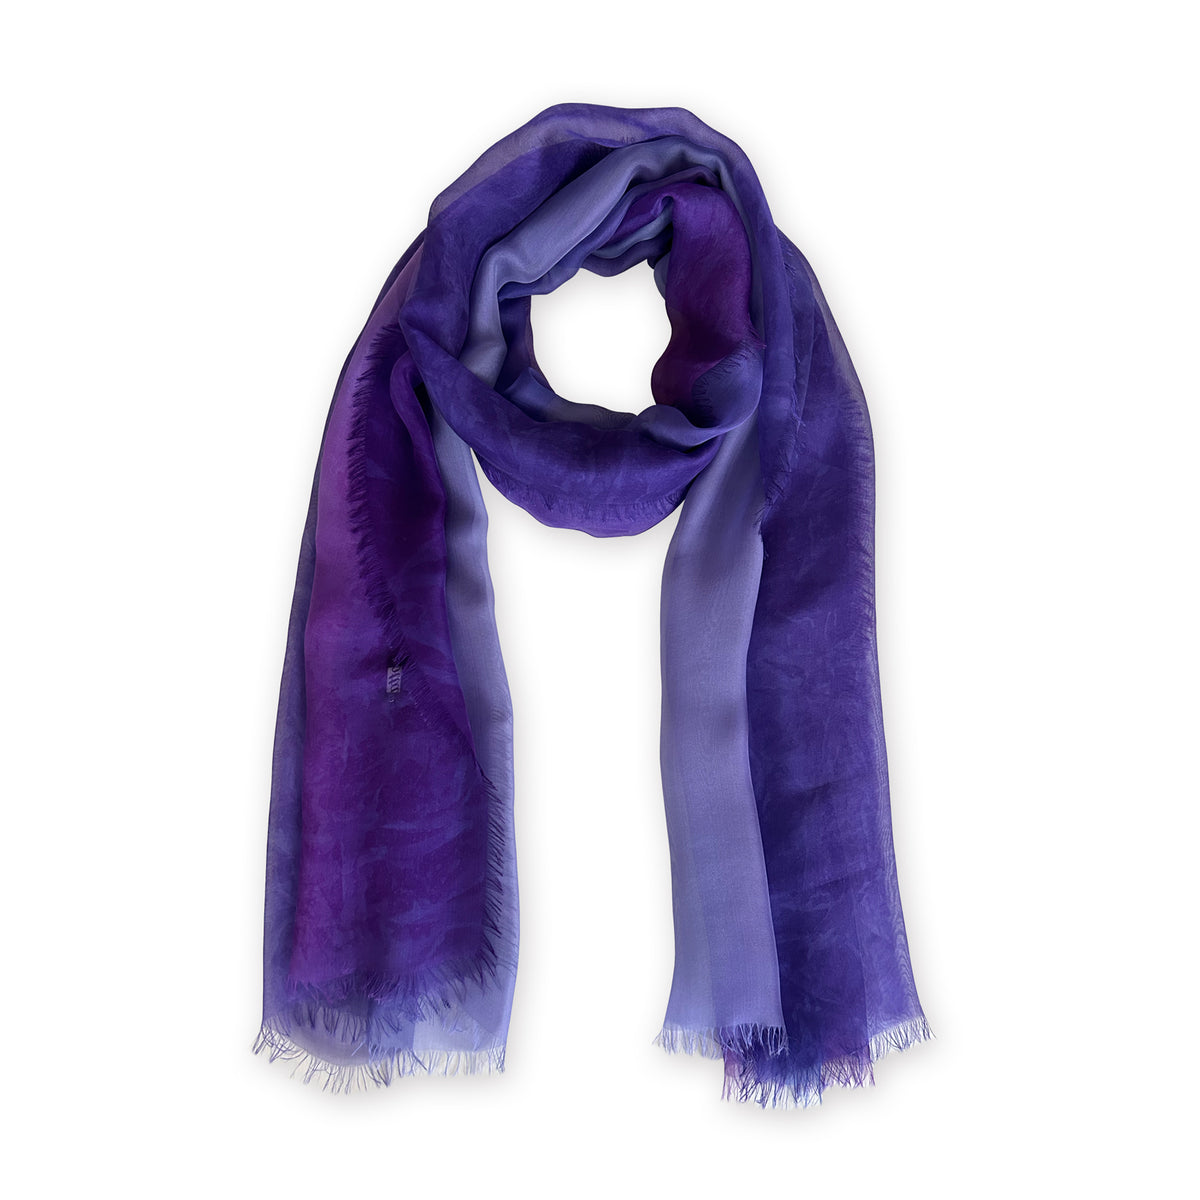 silk-scarf-hand-painted-180x70cm-violet-otta-italy-2345